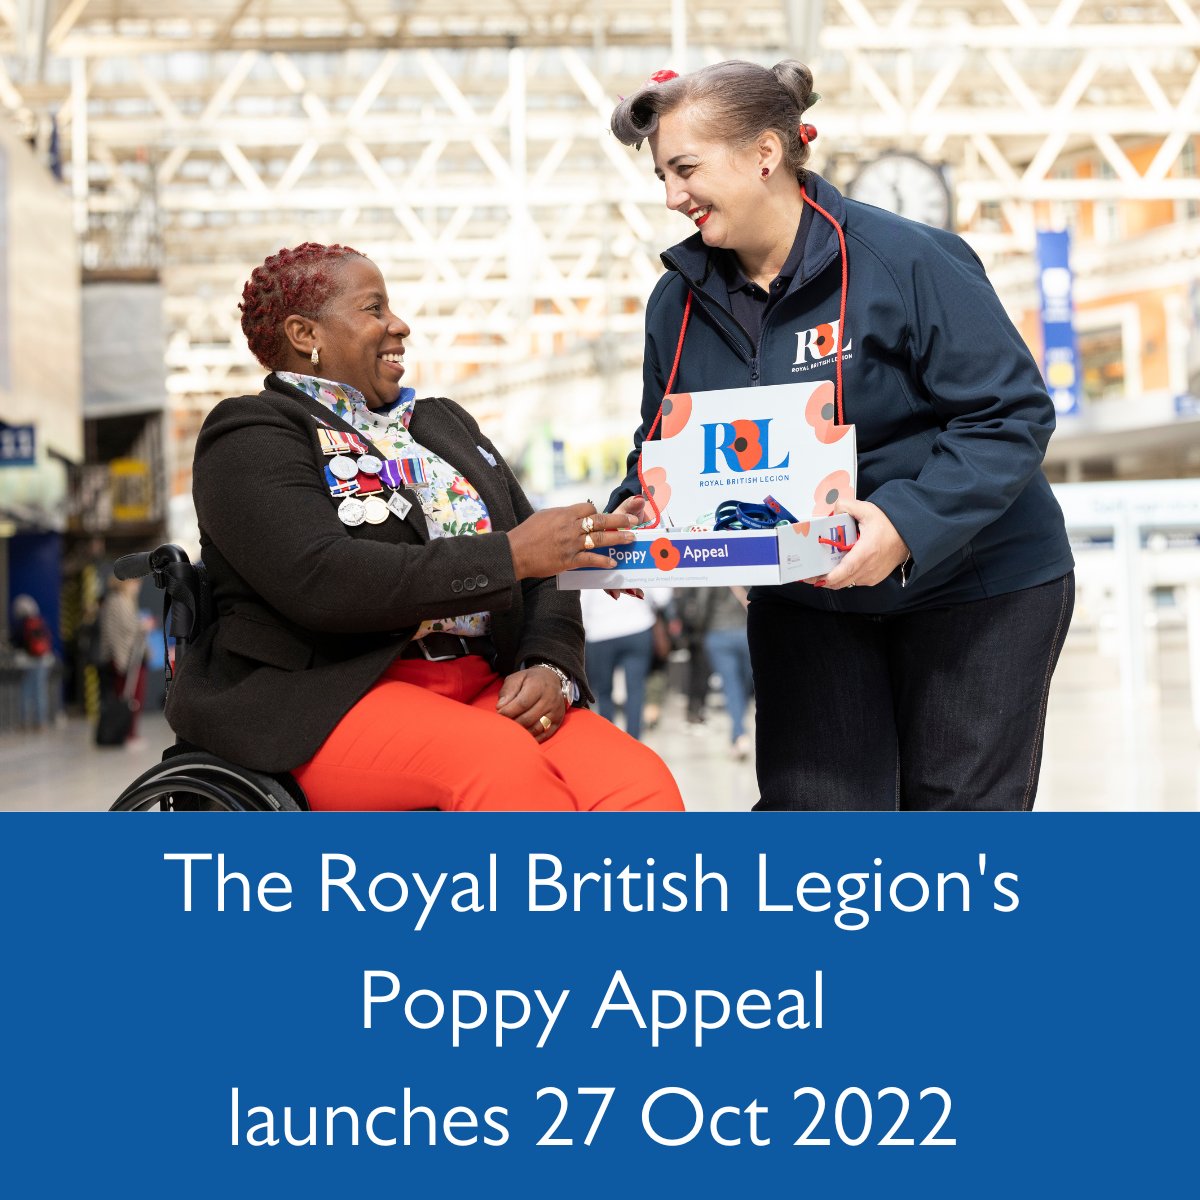 The Royal British Legion's #PoppyAppeal launches tomorrow. 🎉 Our wonderful Poppy Appeal collectors will be out and about distributing poppies and collecting donations. Your poppy shows you care and helps us continue our vital work supporting the Armed Forces community.